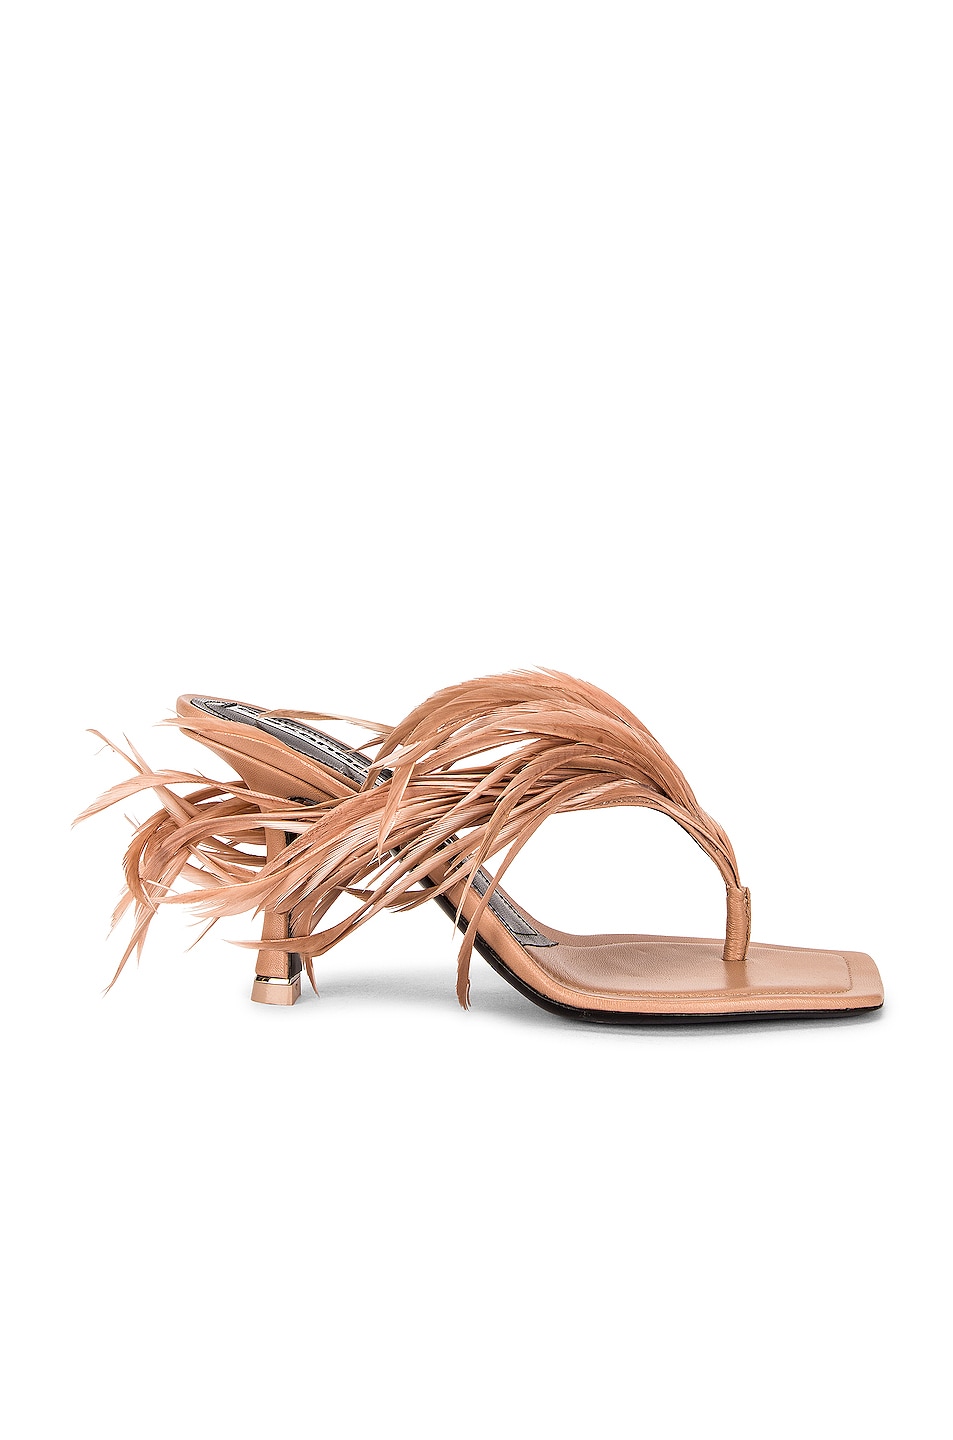 Image 1 of Alexander Wang Ivy 85 Feather Sandal in Sandstone